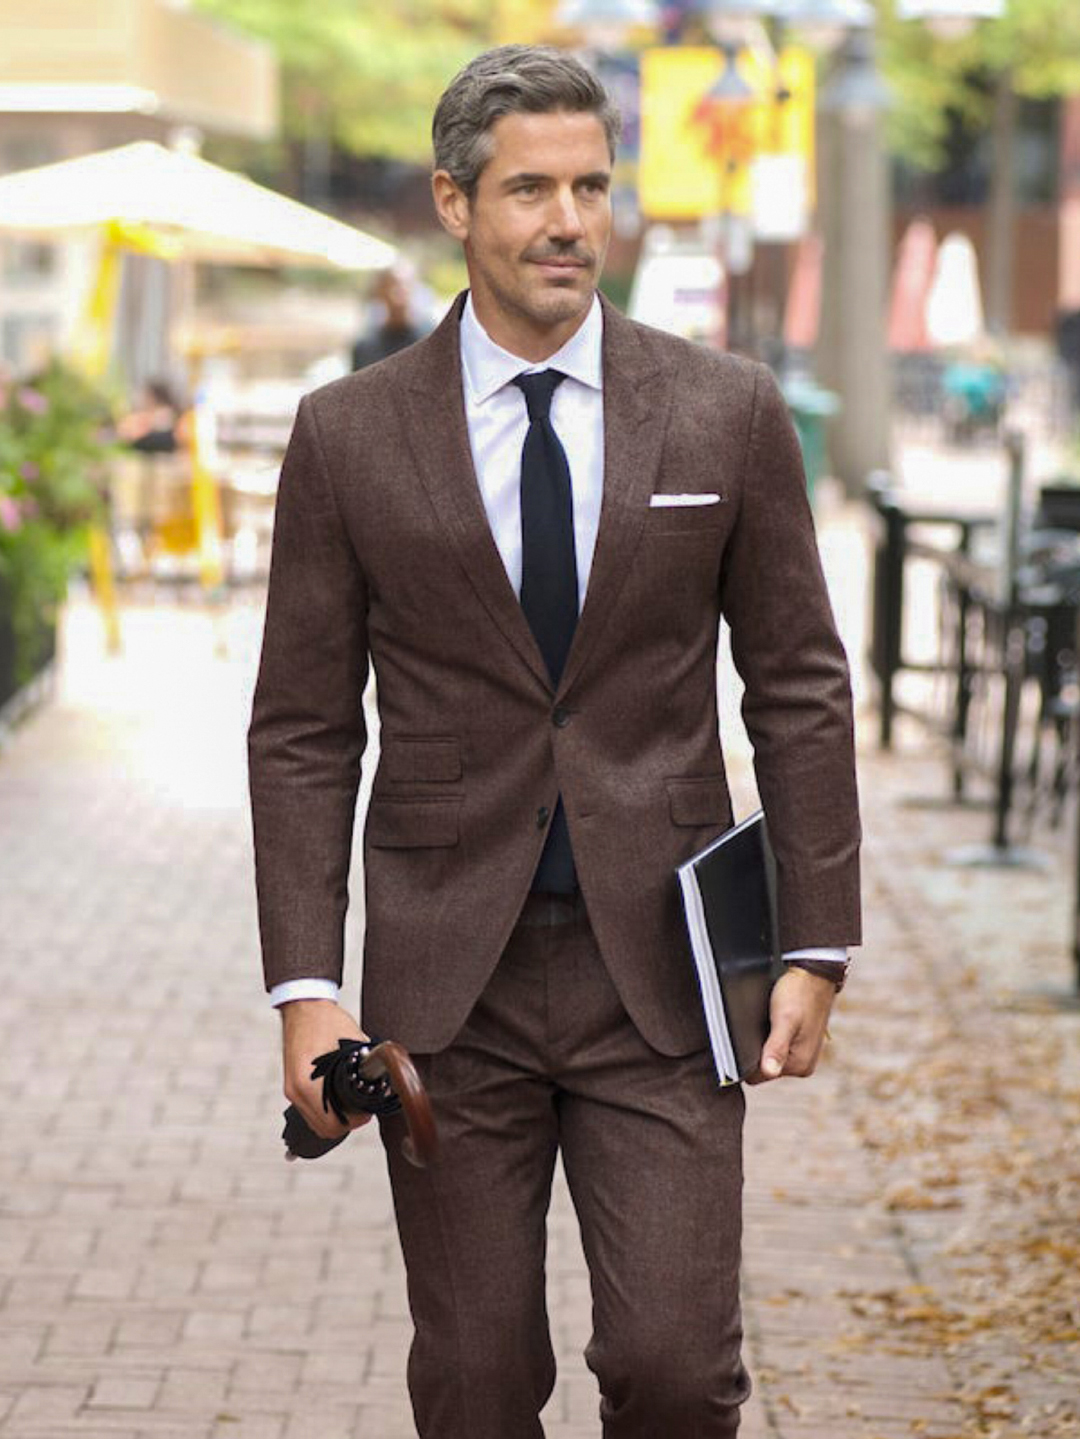 Brown suit, white shirt, and solid black tie